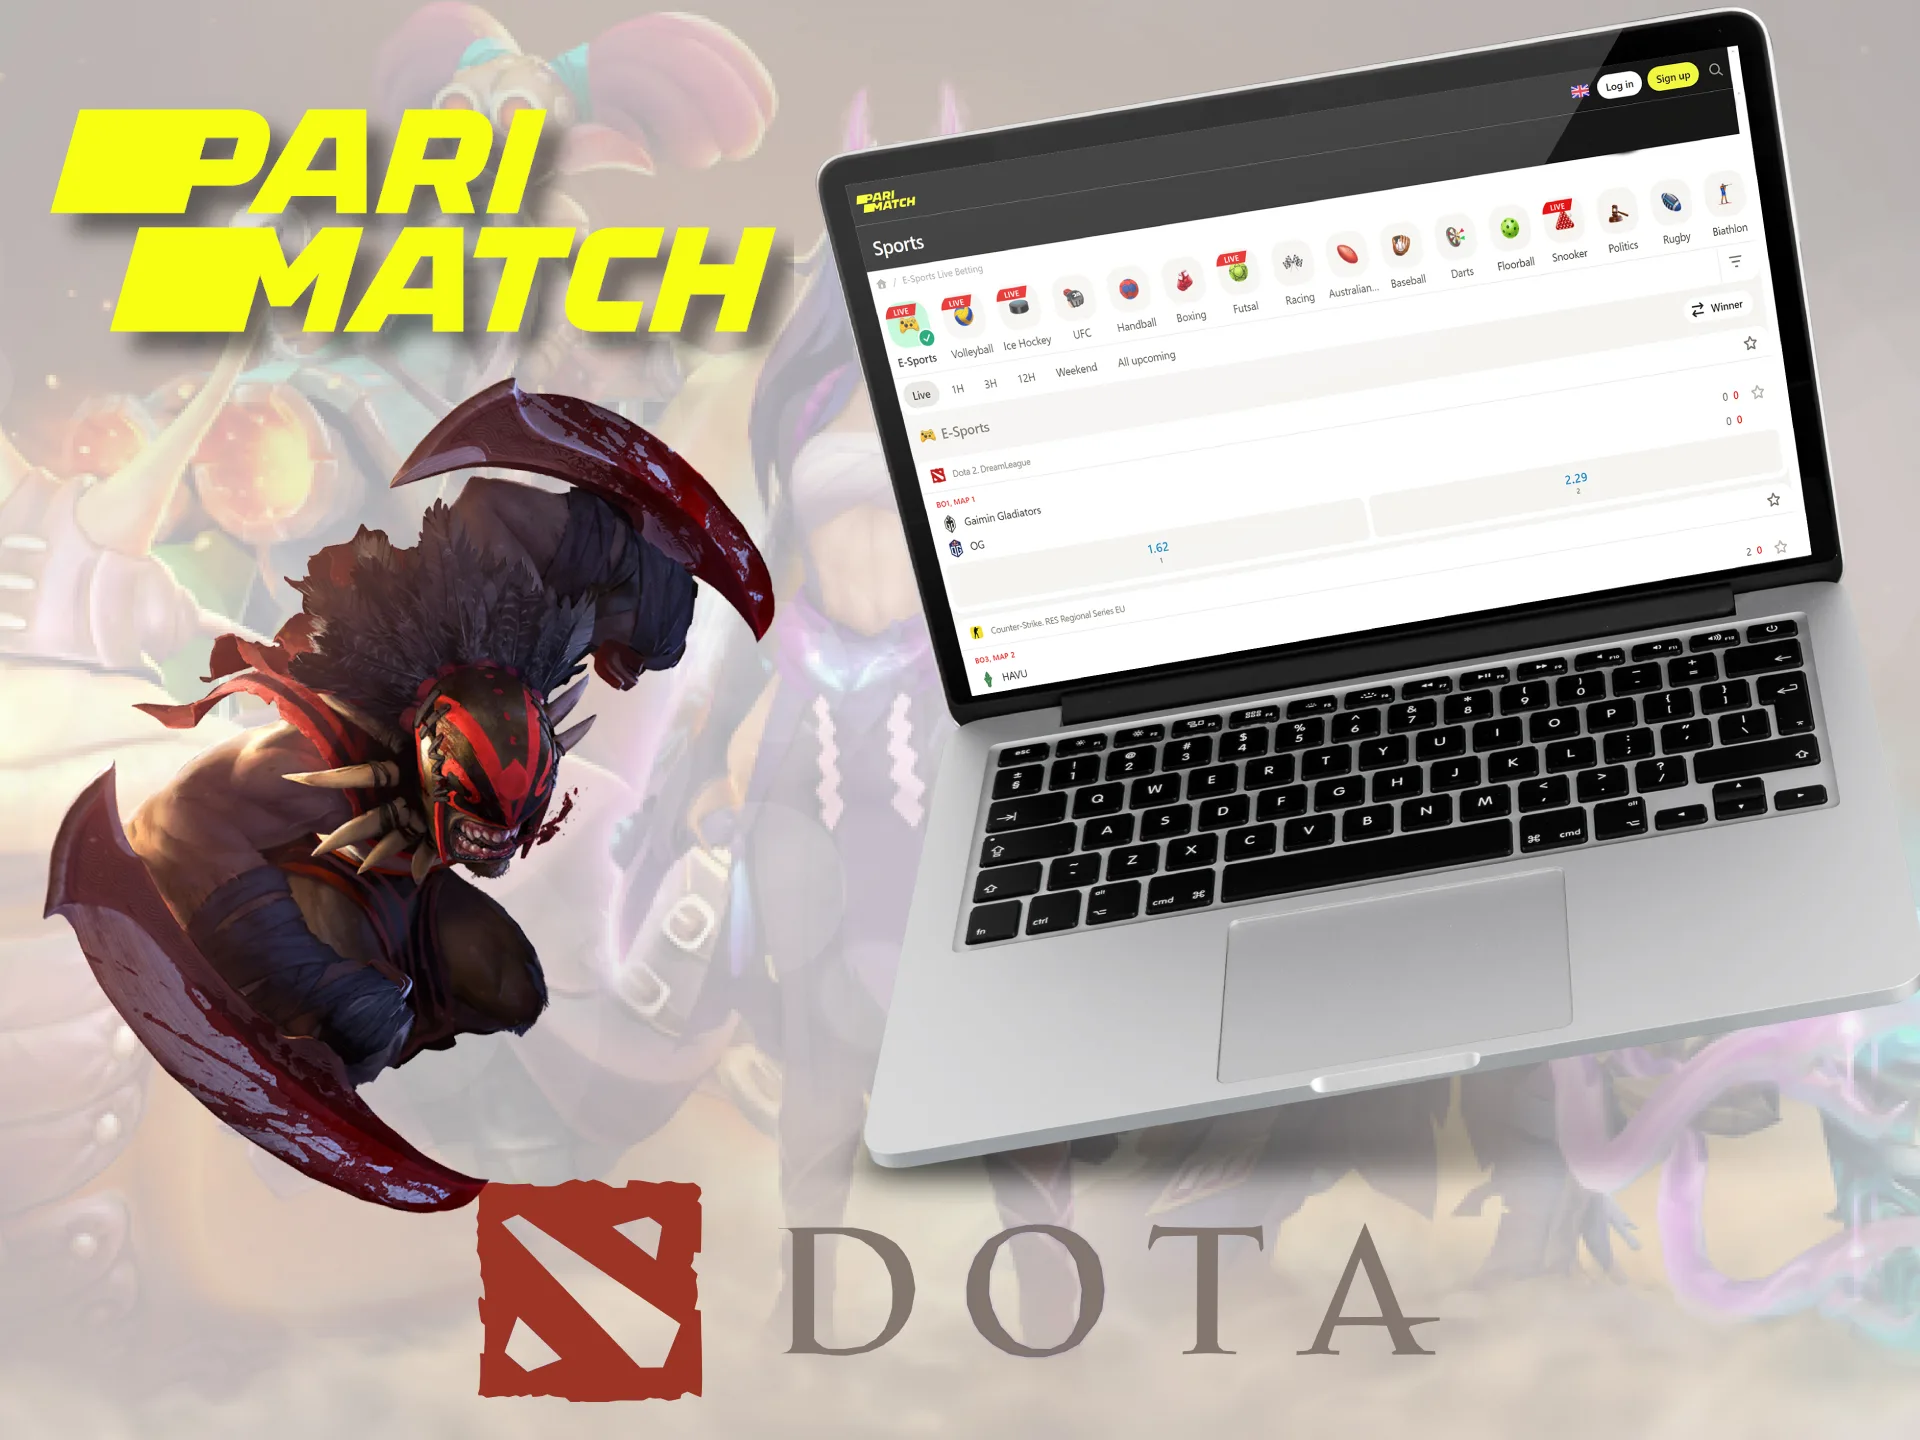 Parimatch offers an extensive betting section on virtual sports and Dota 2.